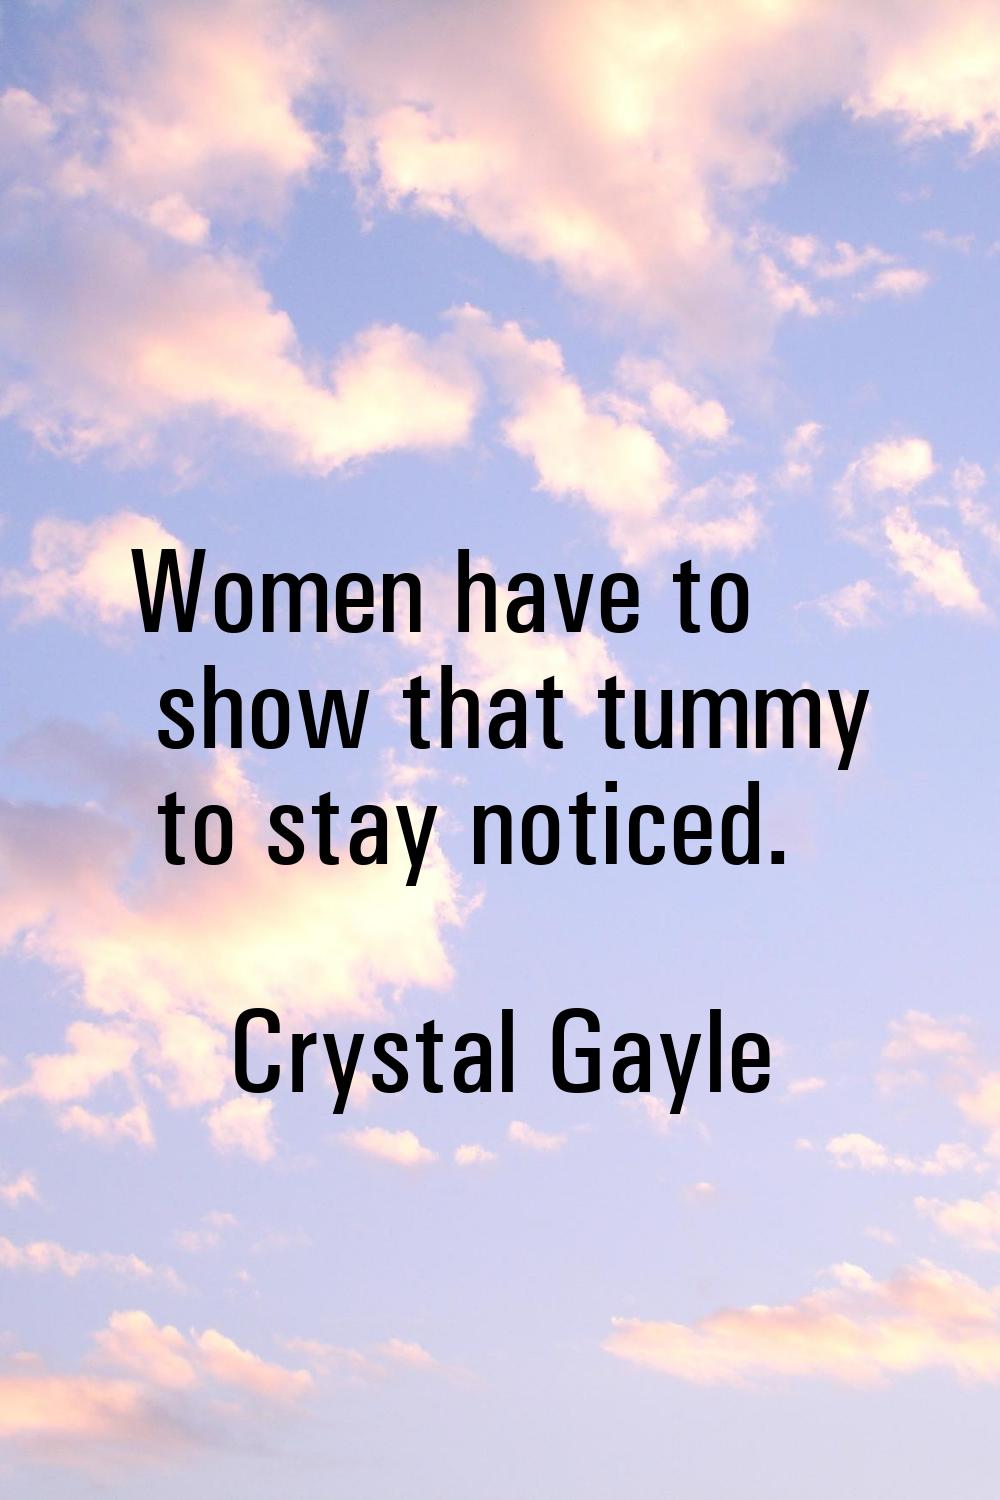 Women have to show that tummy to stay noticed.